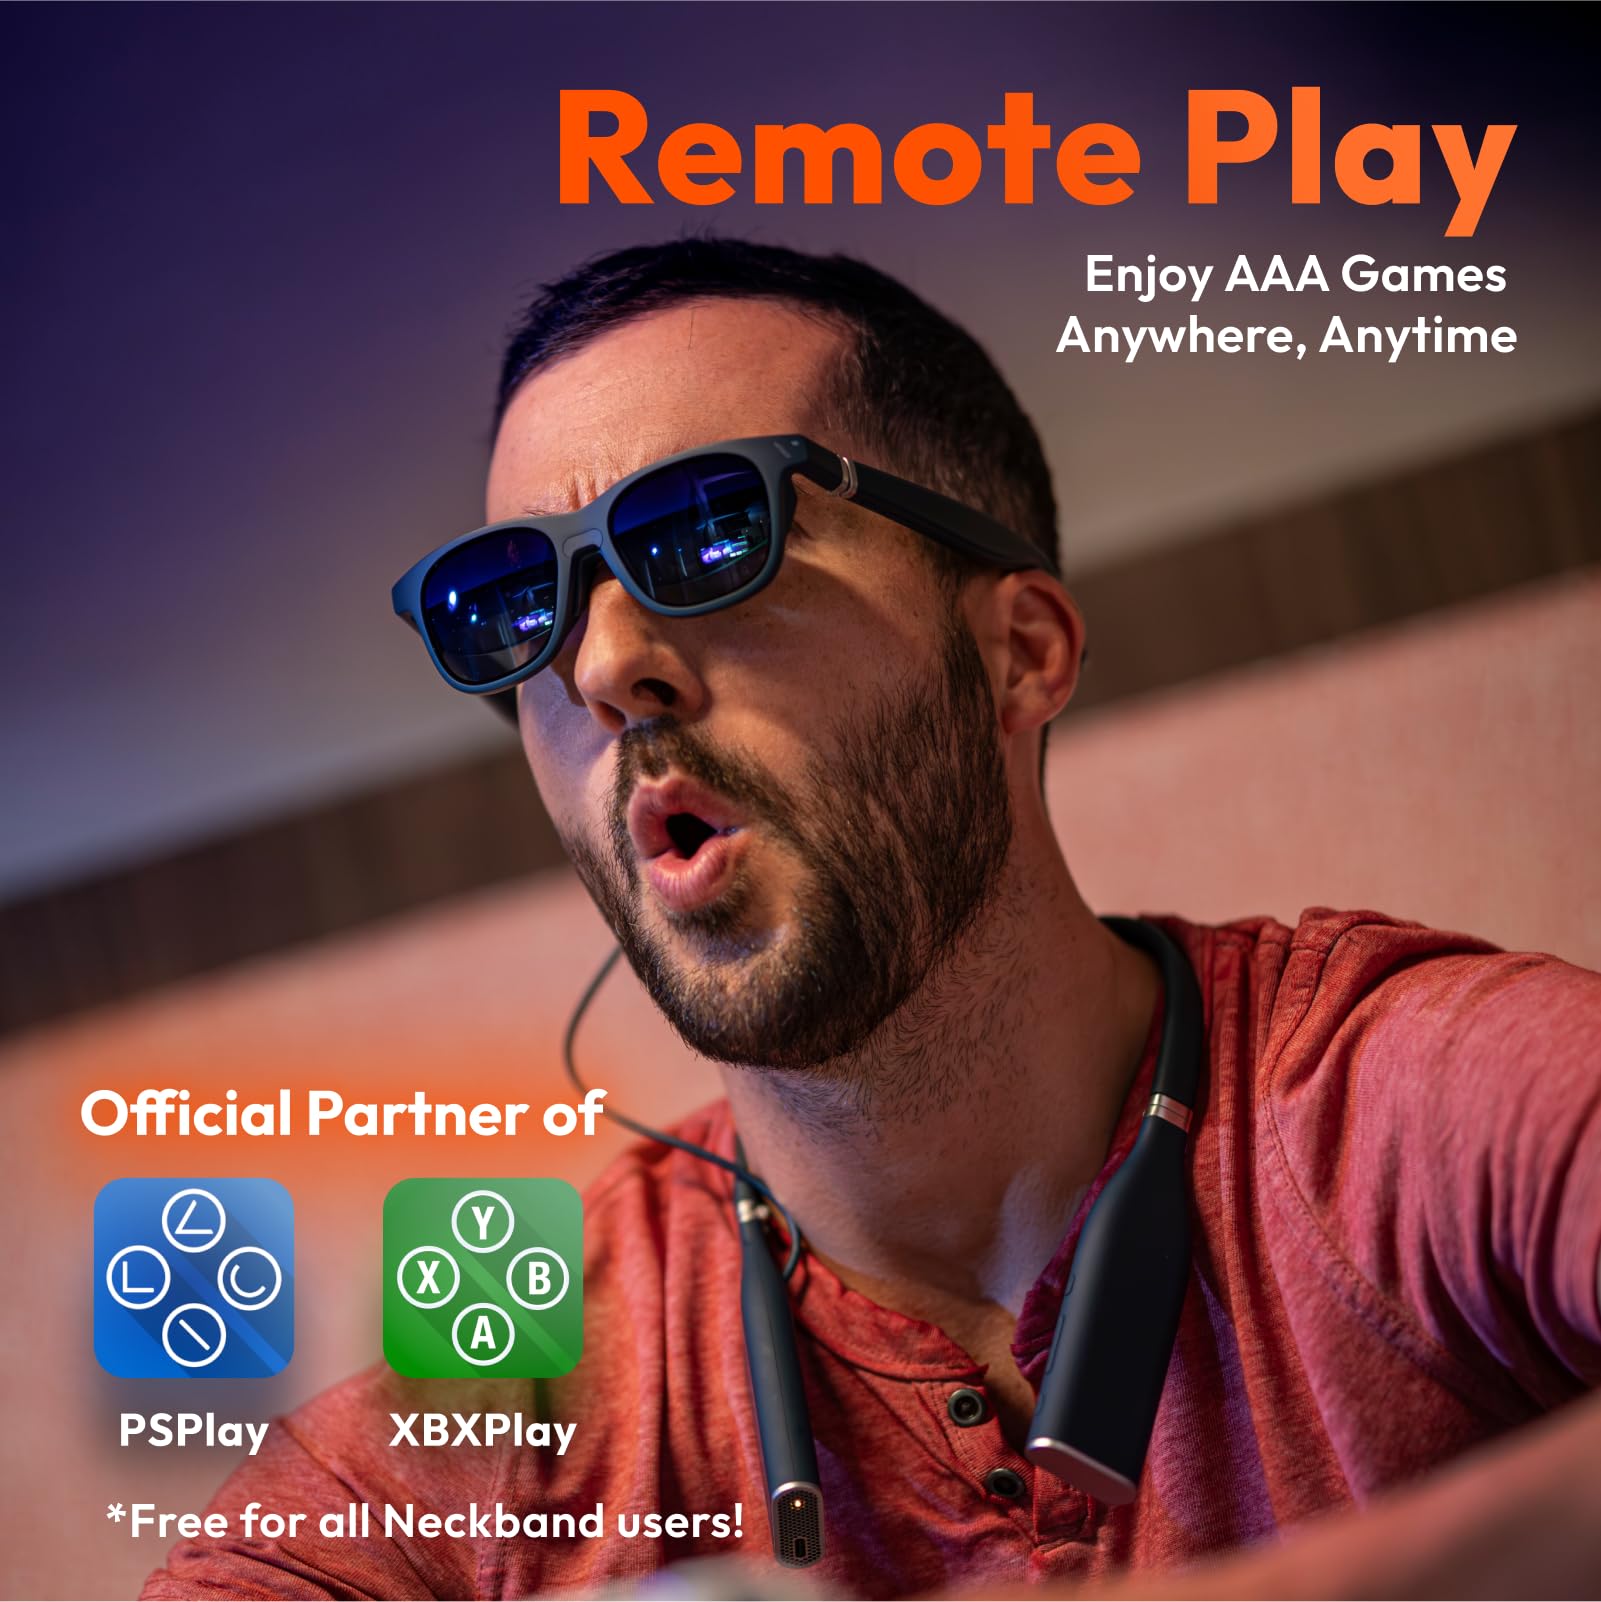 VITURE One XR/AR Glasses & Neckband Bundle, Official Partner of PSPlay & XBXPlay, Remote Play with Playstation/Xbox/PC Games, Streaming On The Go, Cloud Gaming, 128G Storage, Bluetooth (Jet Black)